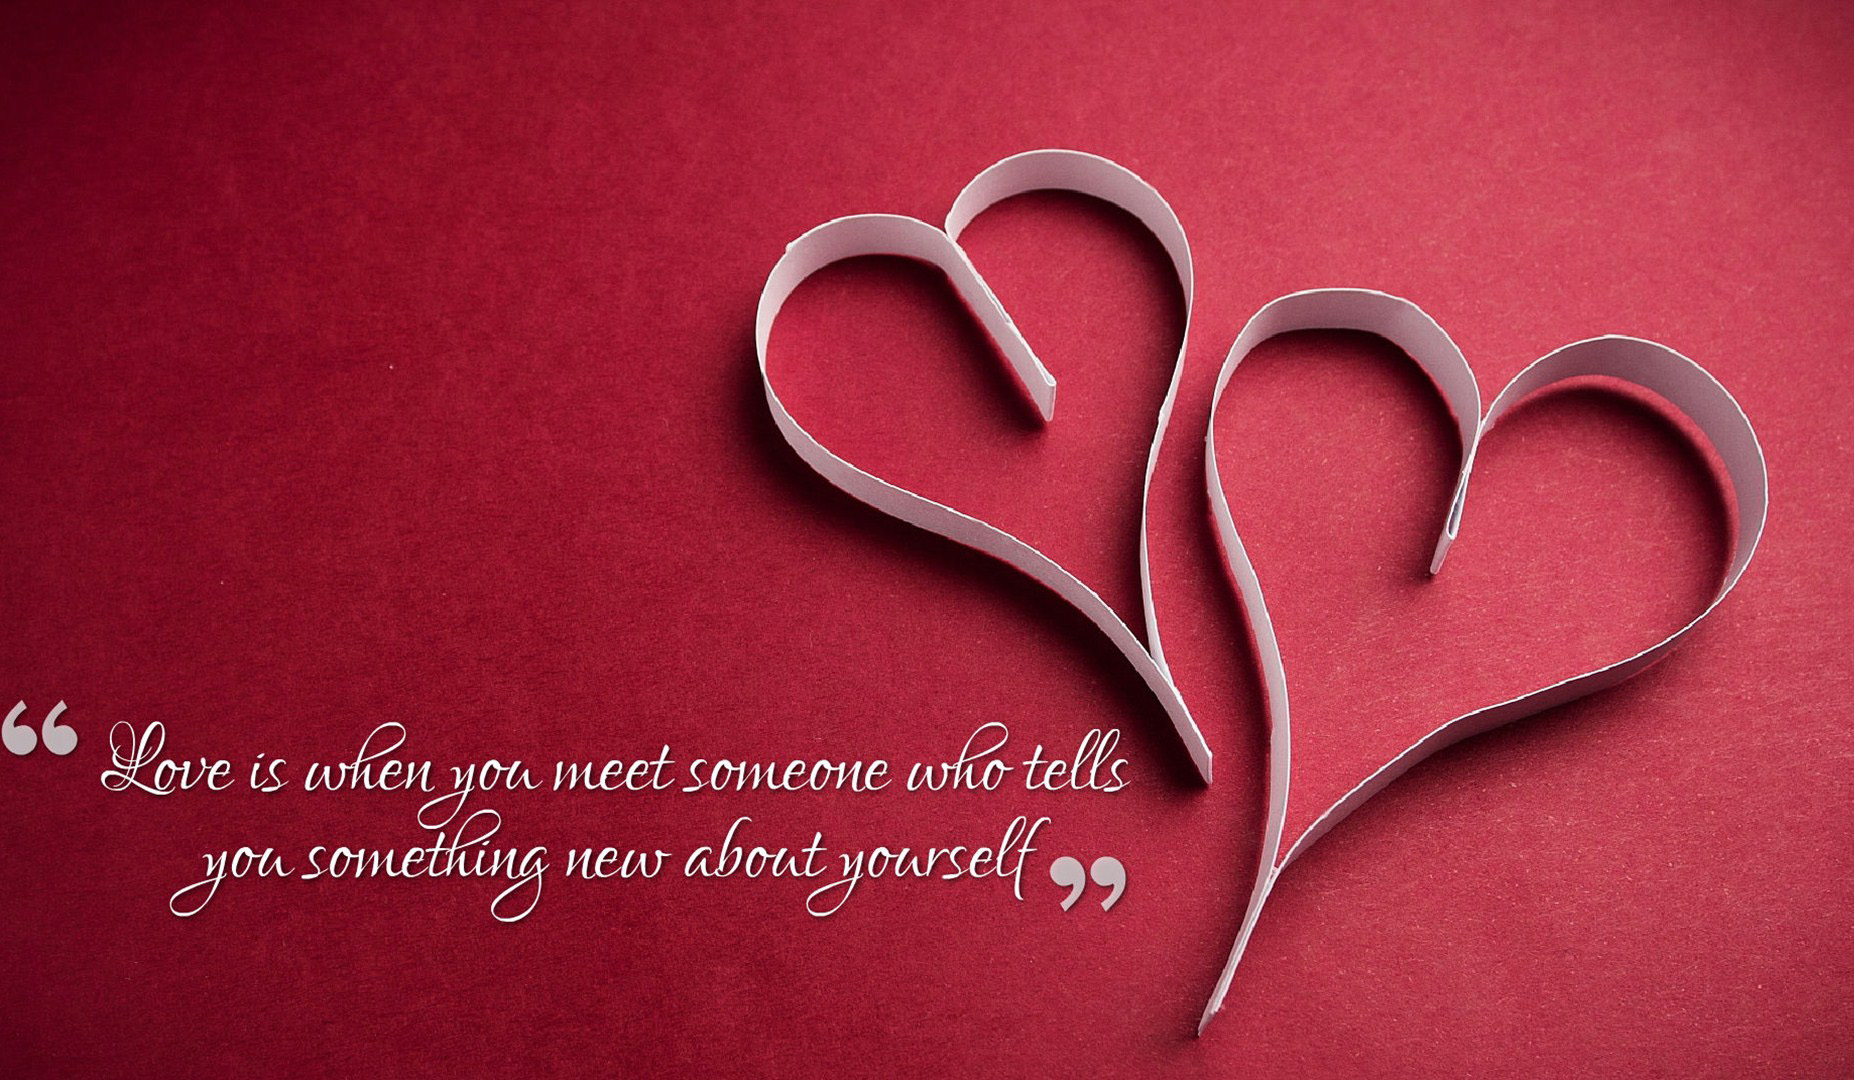 11+ Awesome And Heartfelt Quotes On Love